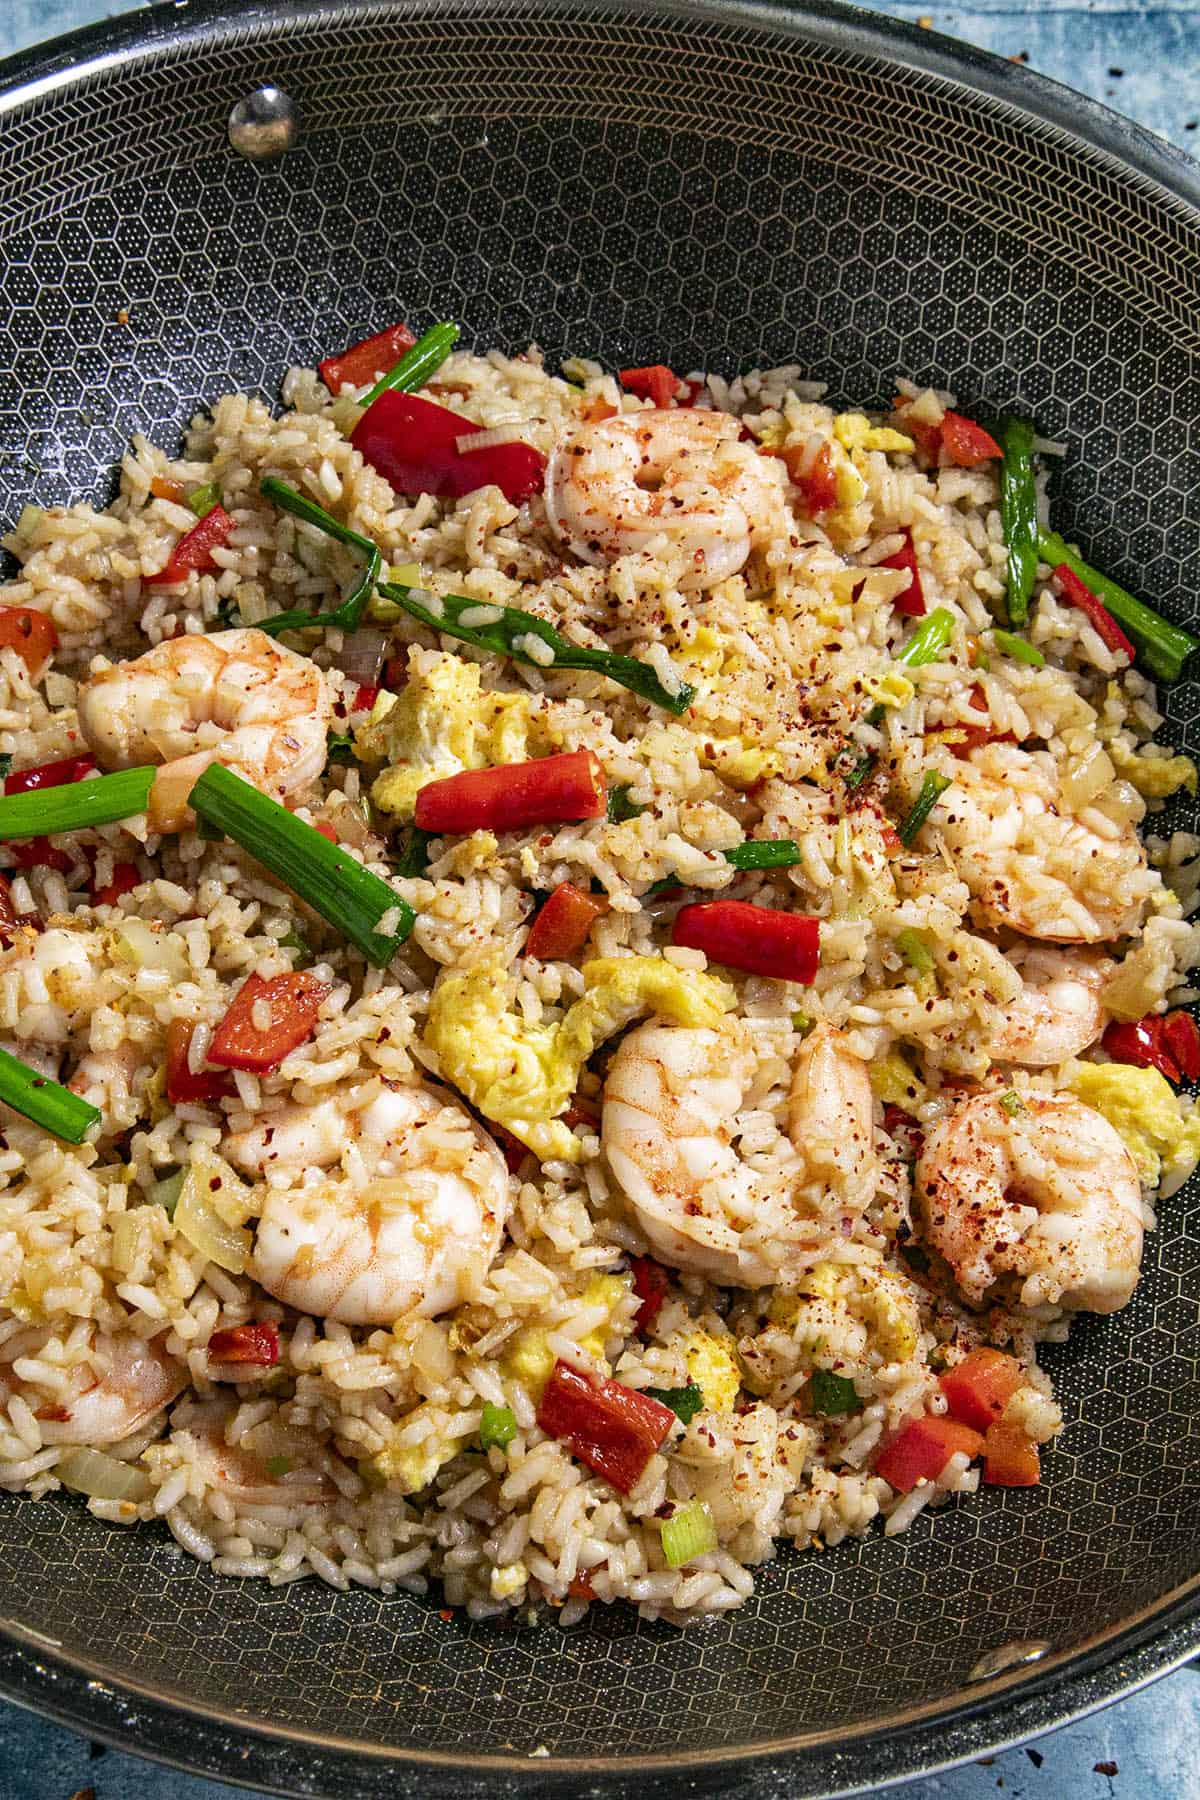 Thai Fried Rice in a wok, ready to serve